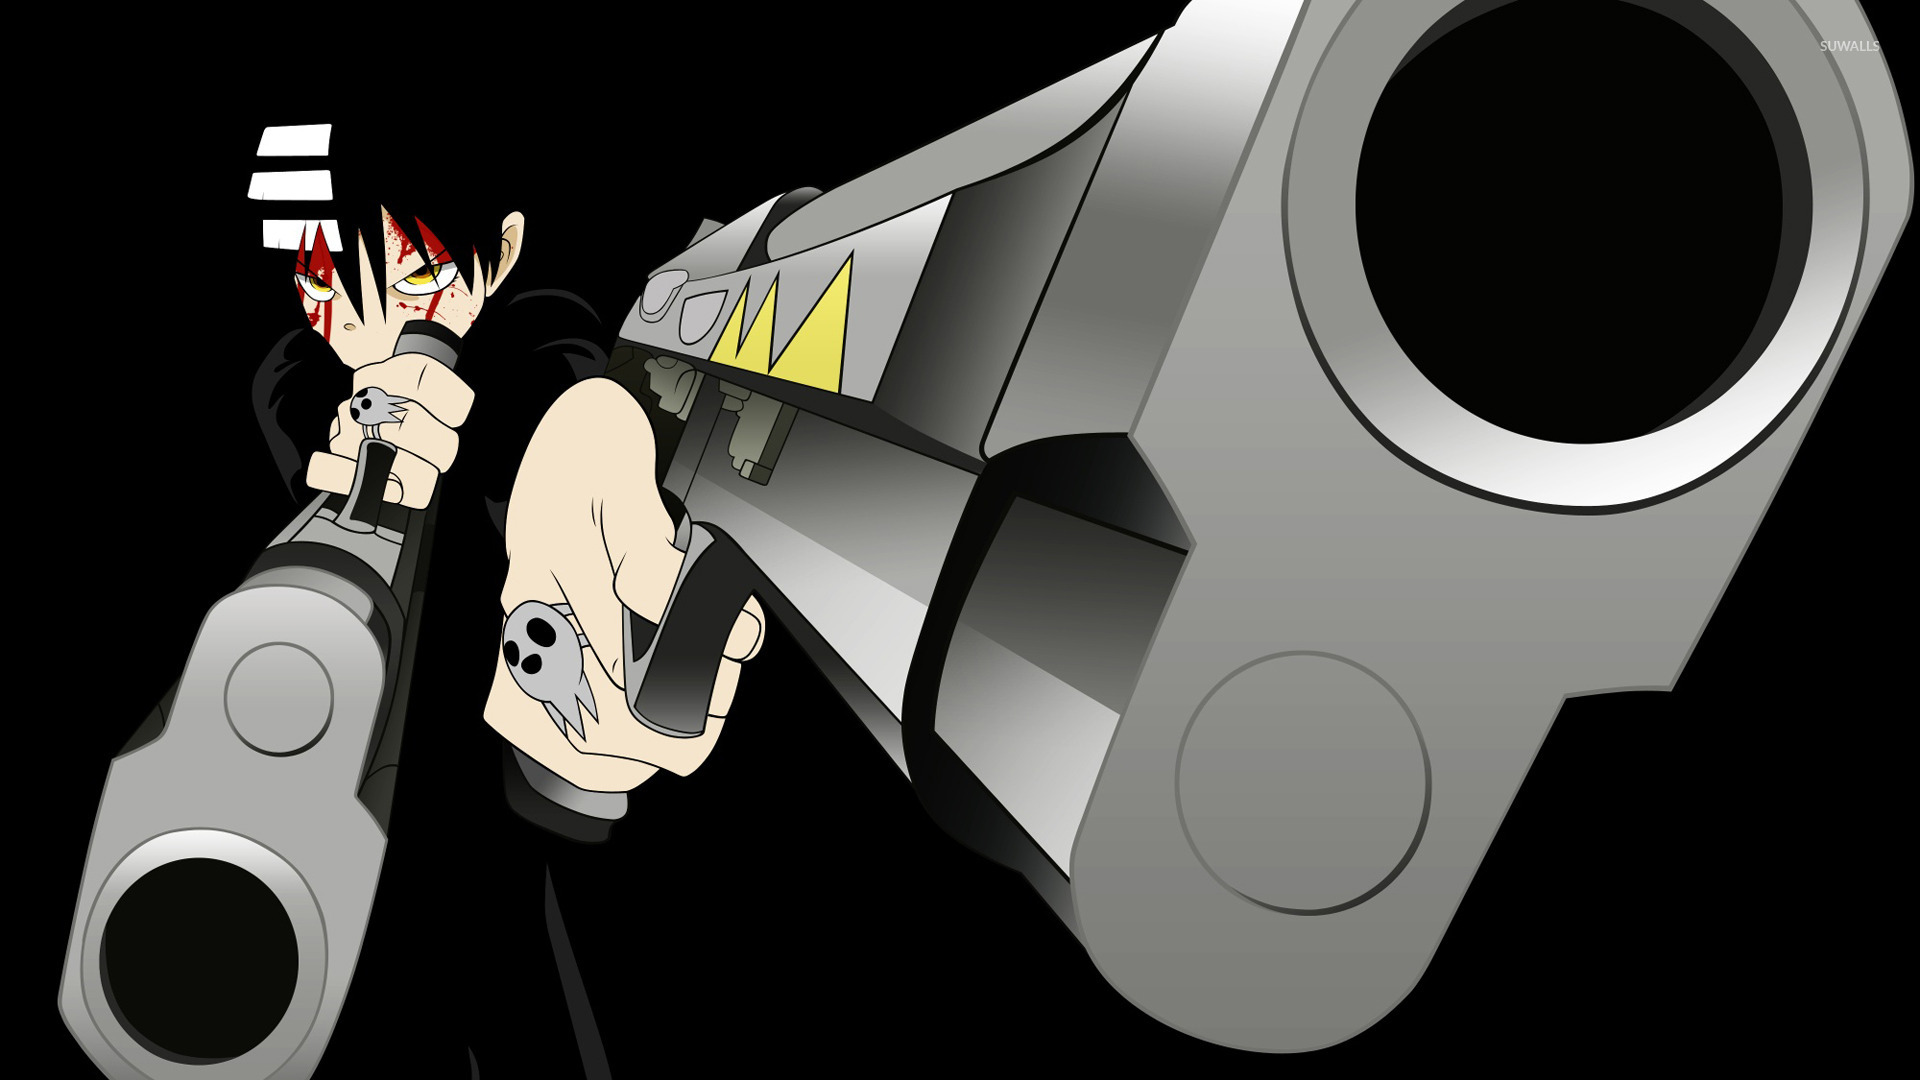 Death the Kid - Soul Eater [3] wallpaper - Anime wallpapers - #15370